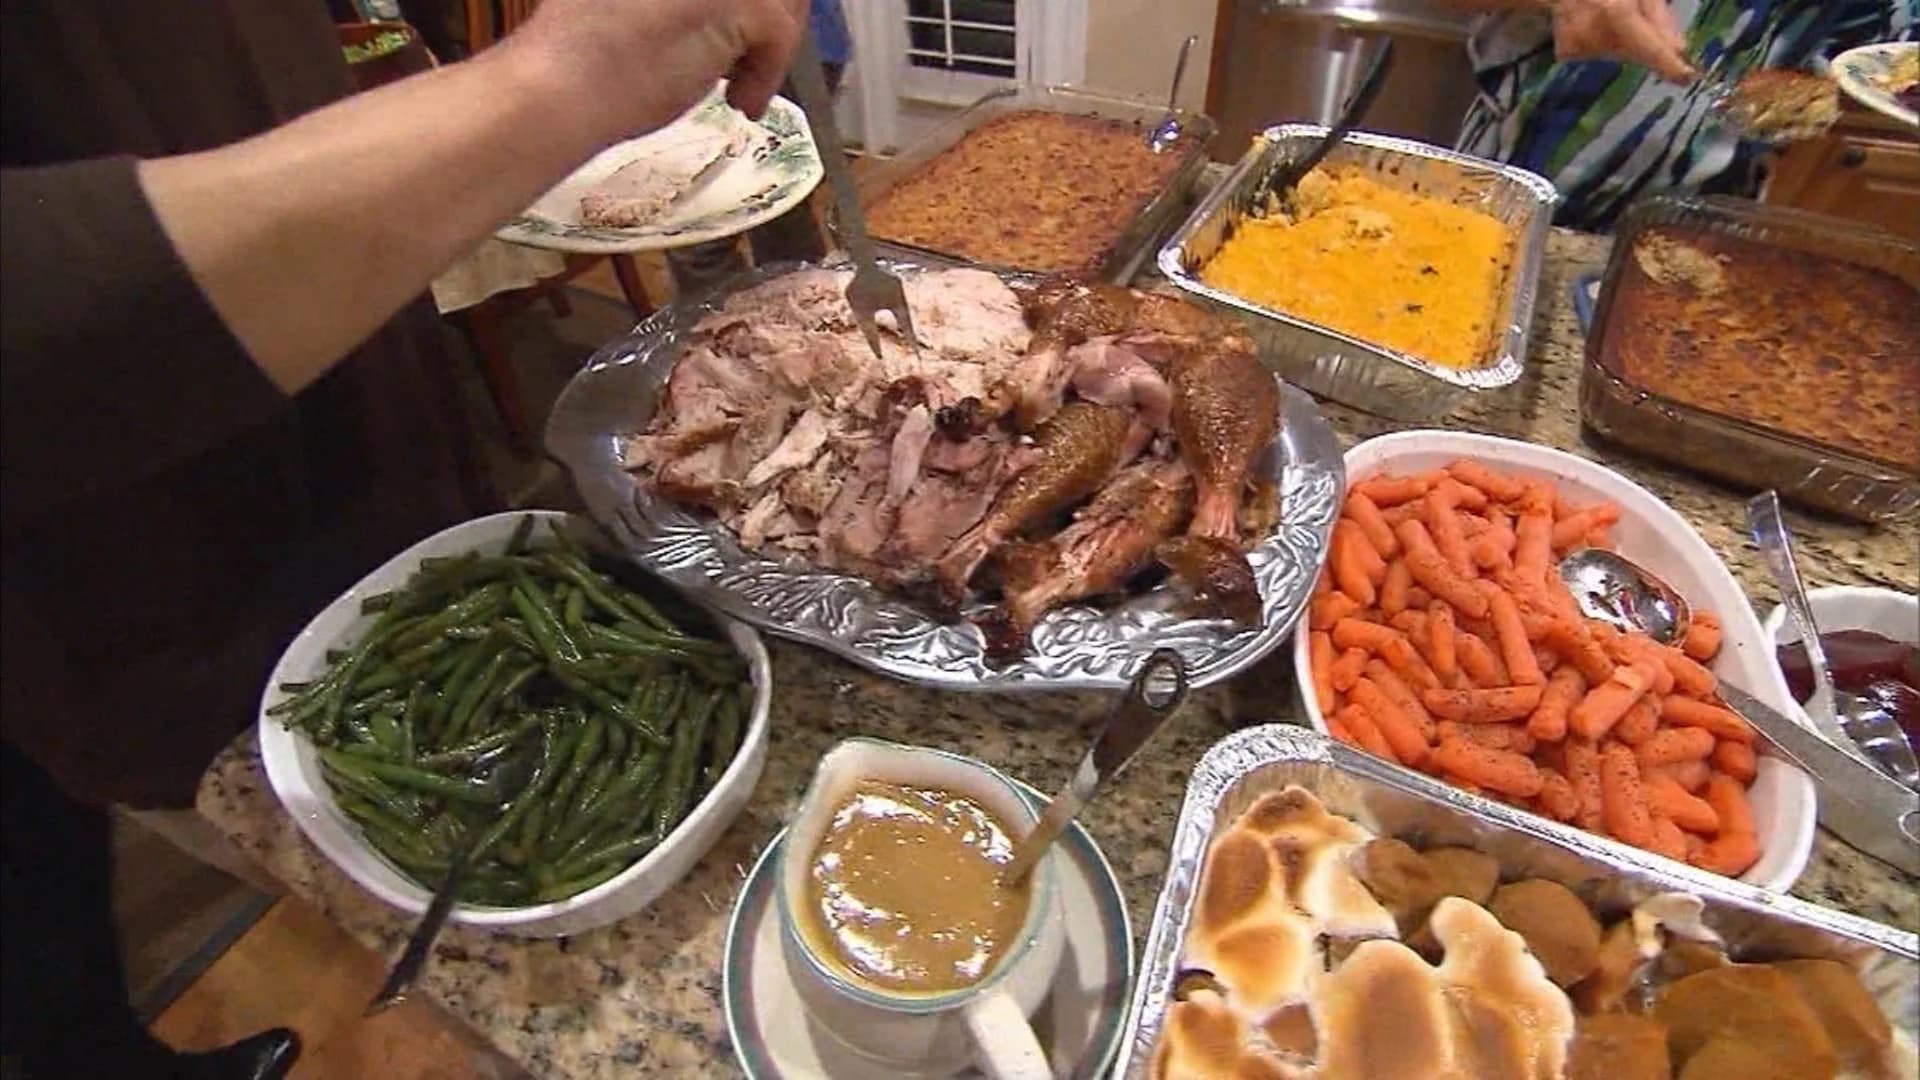 Americans expected to consume over 4,000 calories on Thanksgiving